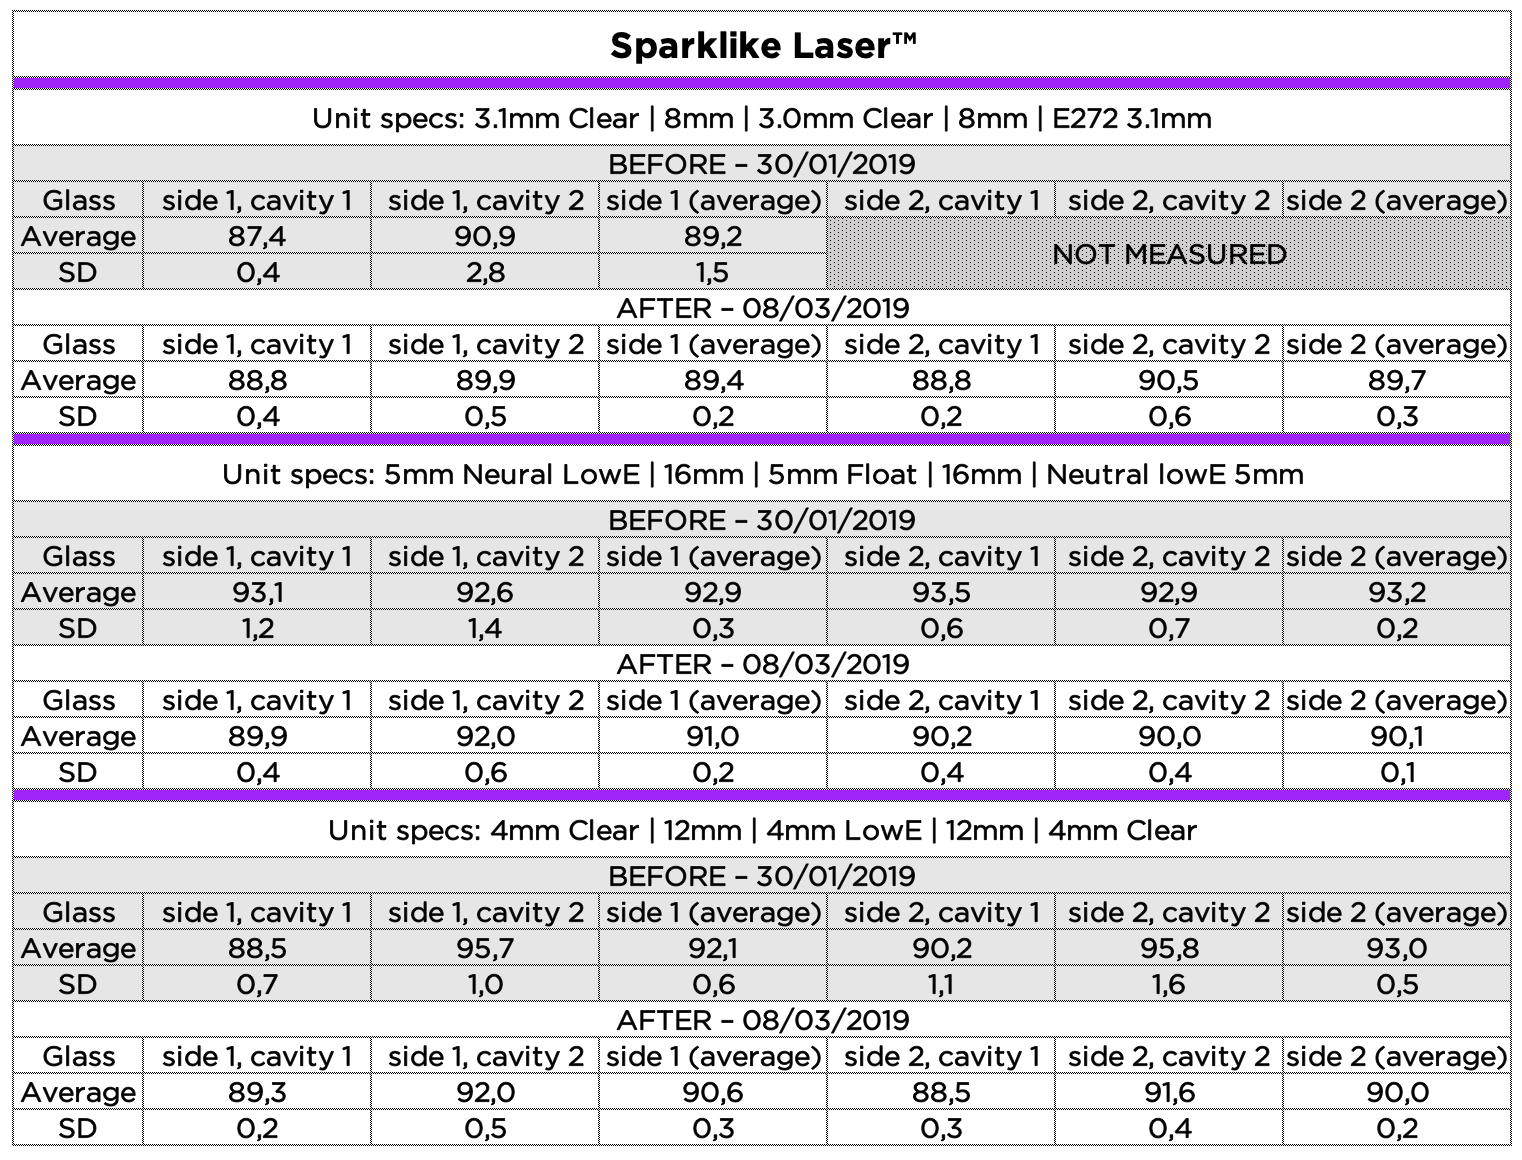 Sparklike Laser™ in-house quality test procedure results before and after the device had undergone thorough calibration and maintenance